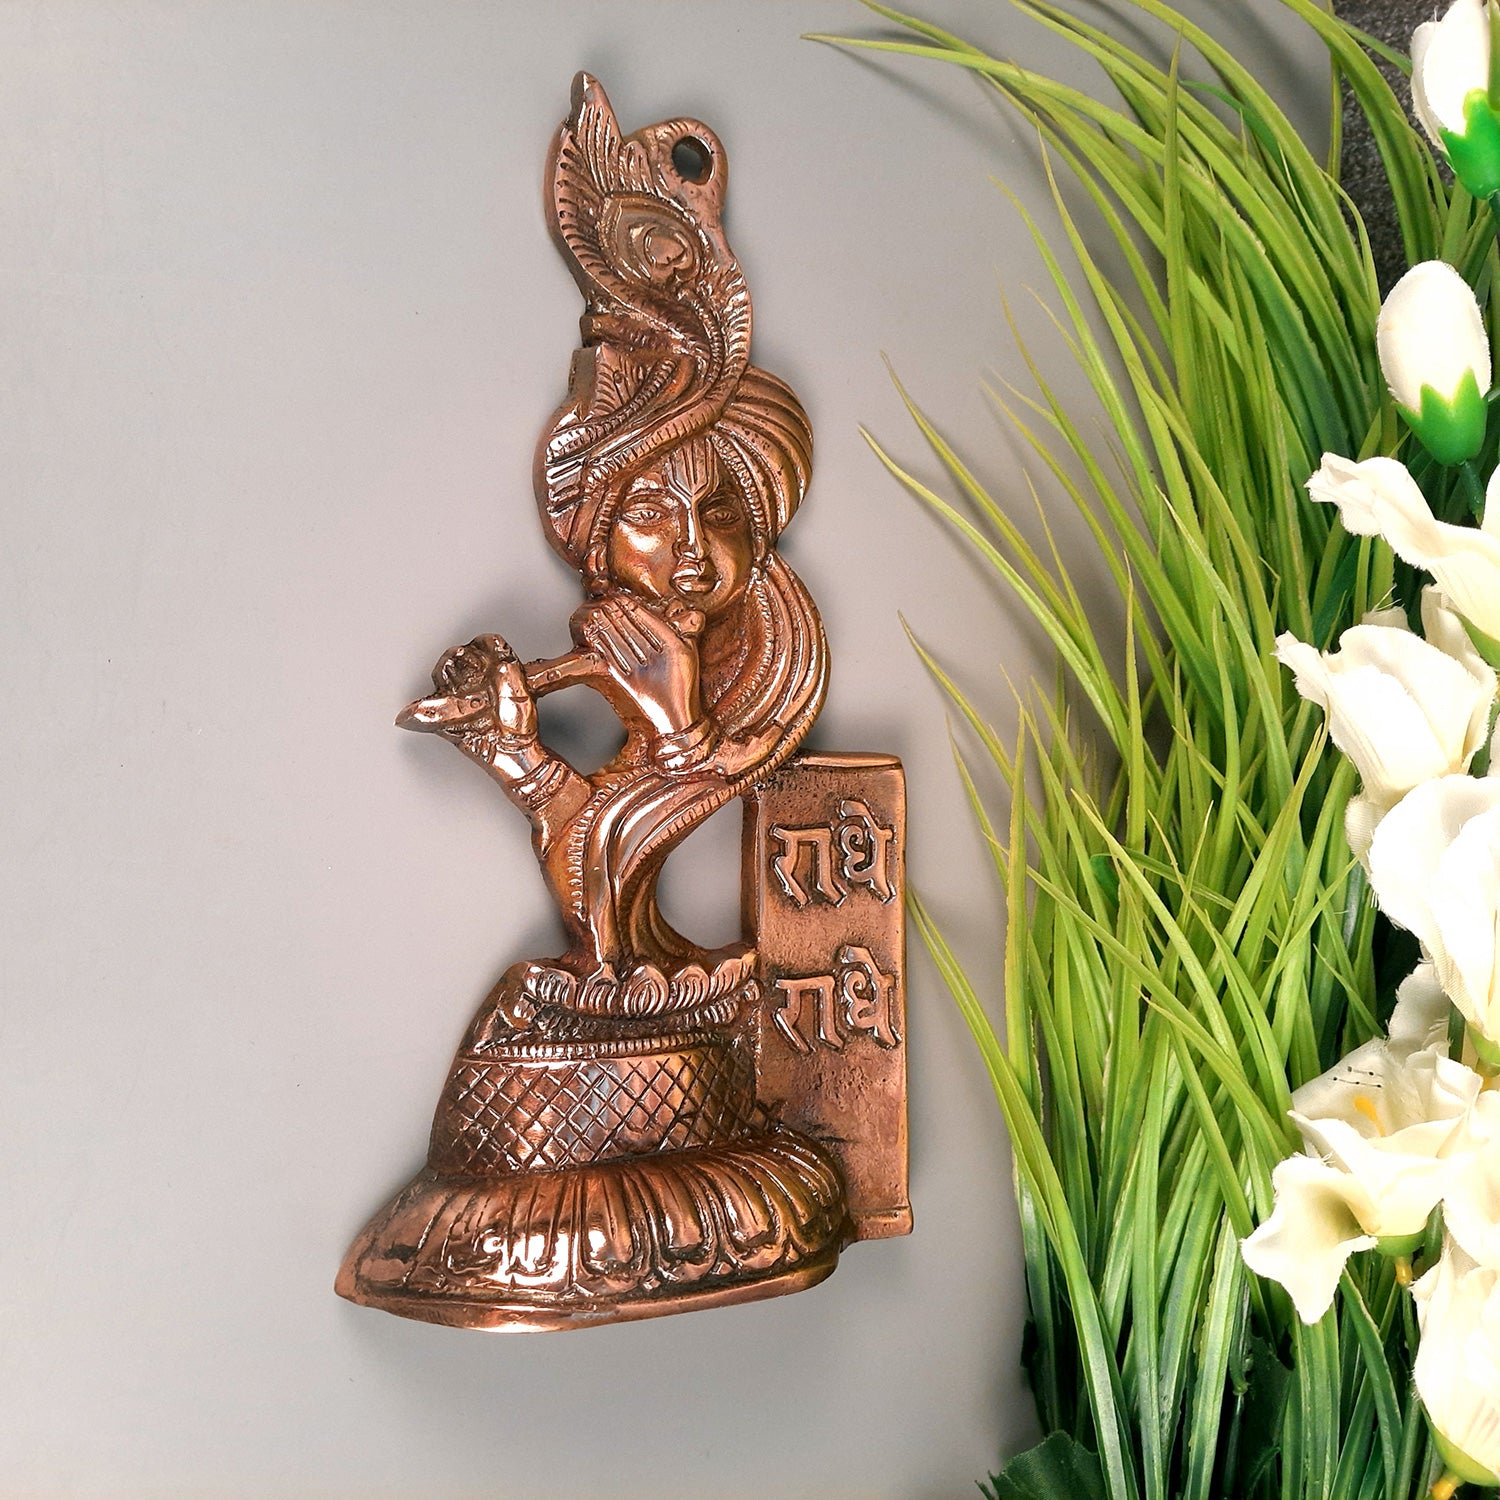 Shri Krishna Wall Hanging Idol | Lord Krishna Face Wall Hanging  Statue Murti | Religious & Spiritual Art Sculpture - for Gift, Home, Living Room, Office, Puja Room Decoration - 11 Inch